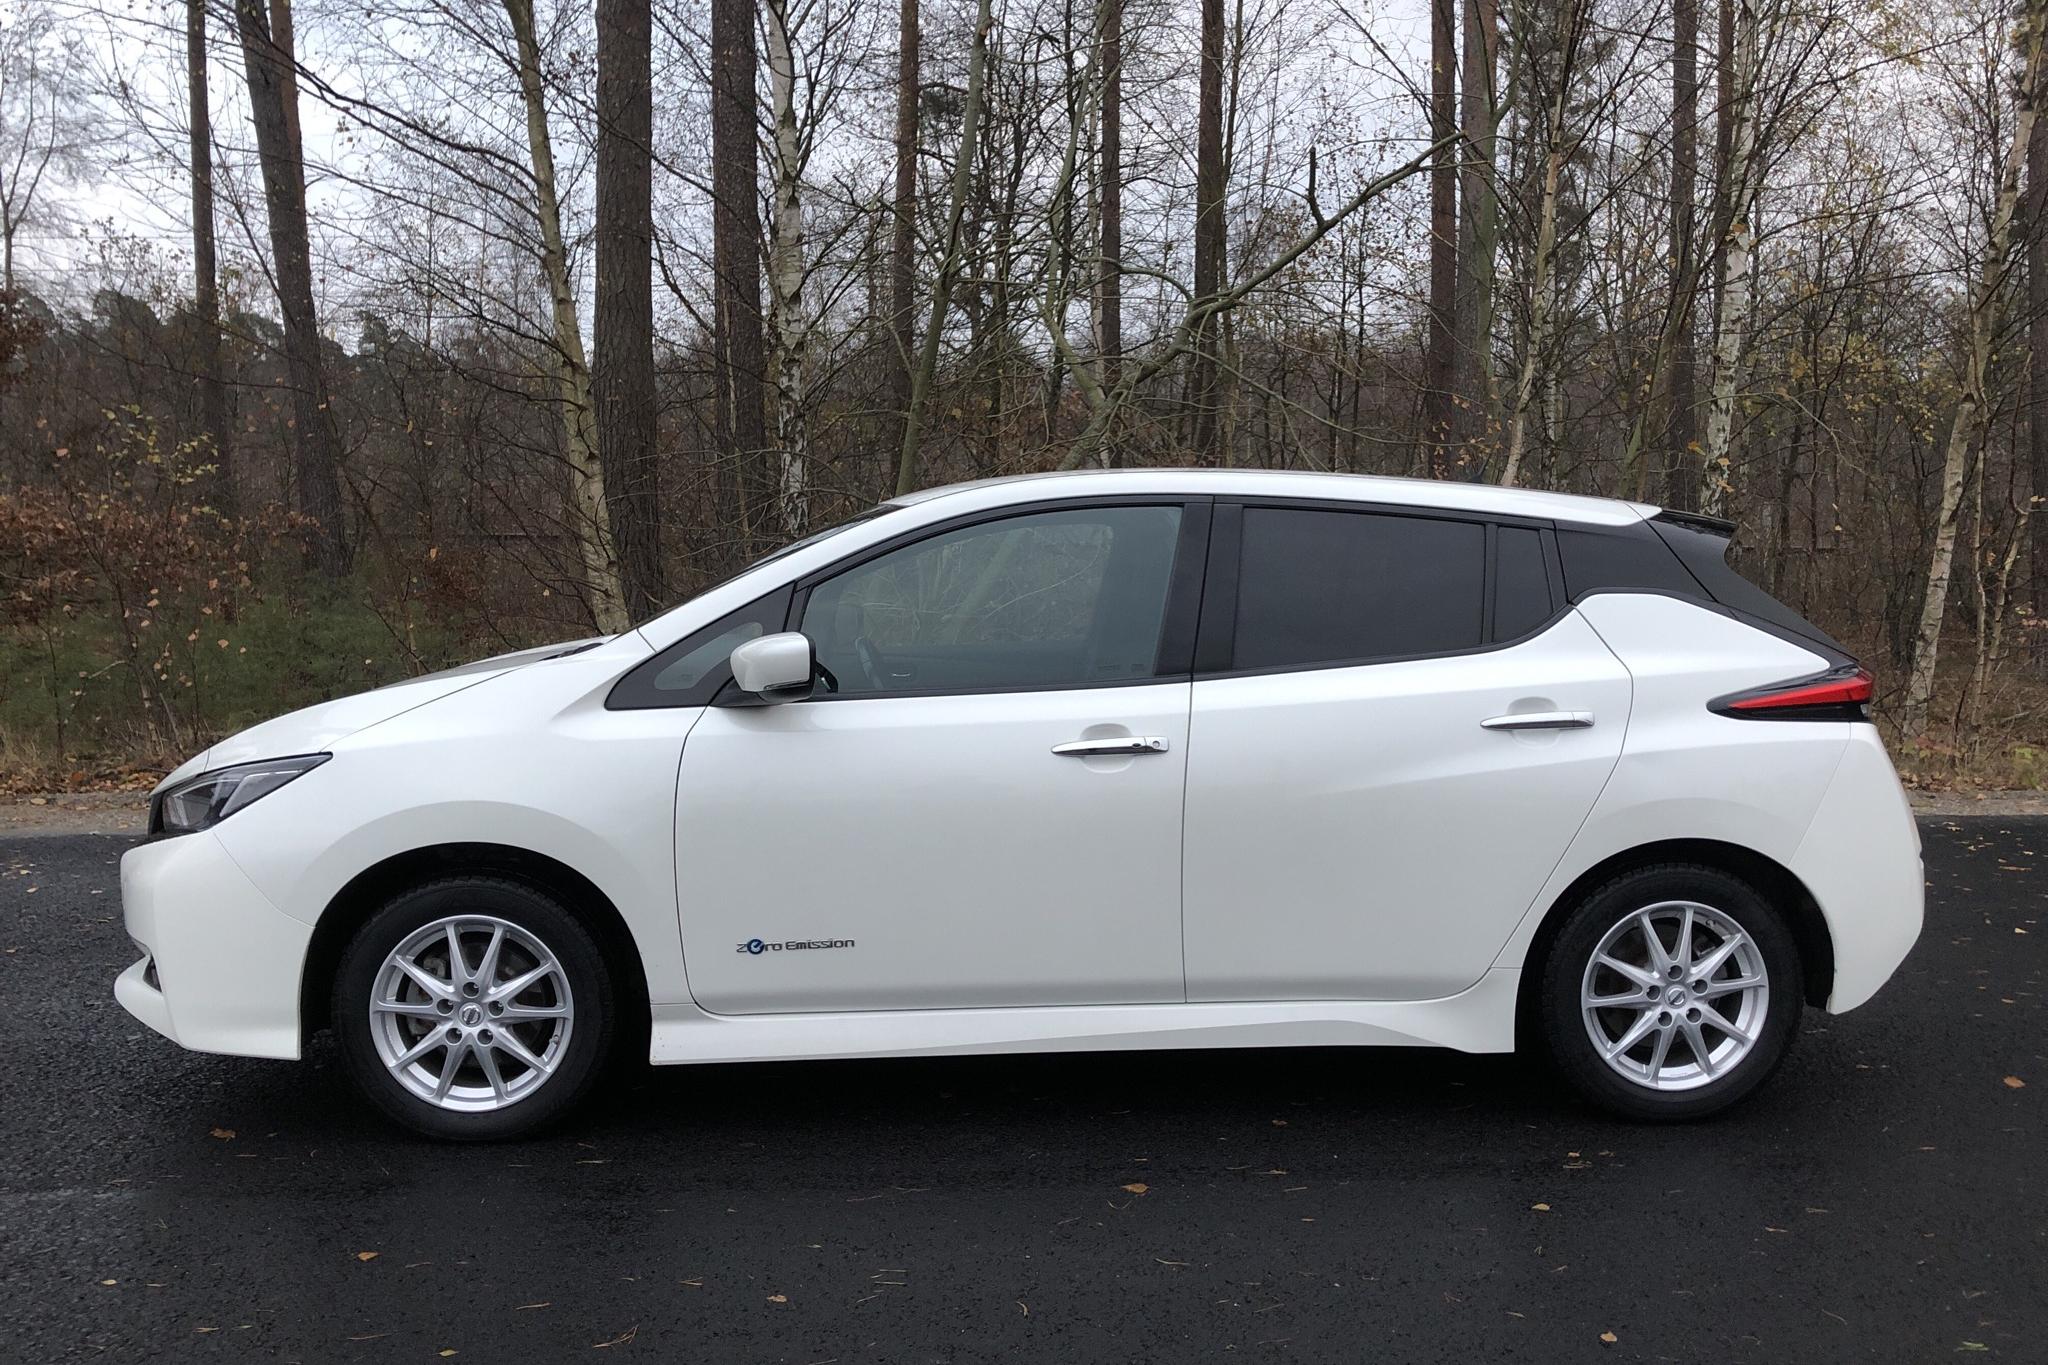 Nissan LEAF 5dr 39 kWh (150hk) - 58 550 km - Automatic - white - 2018